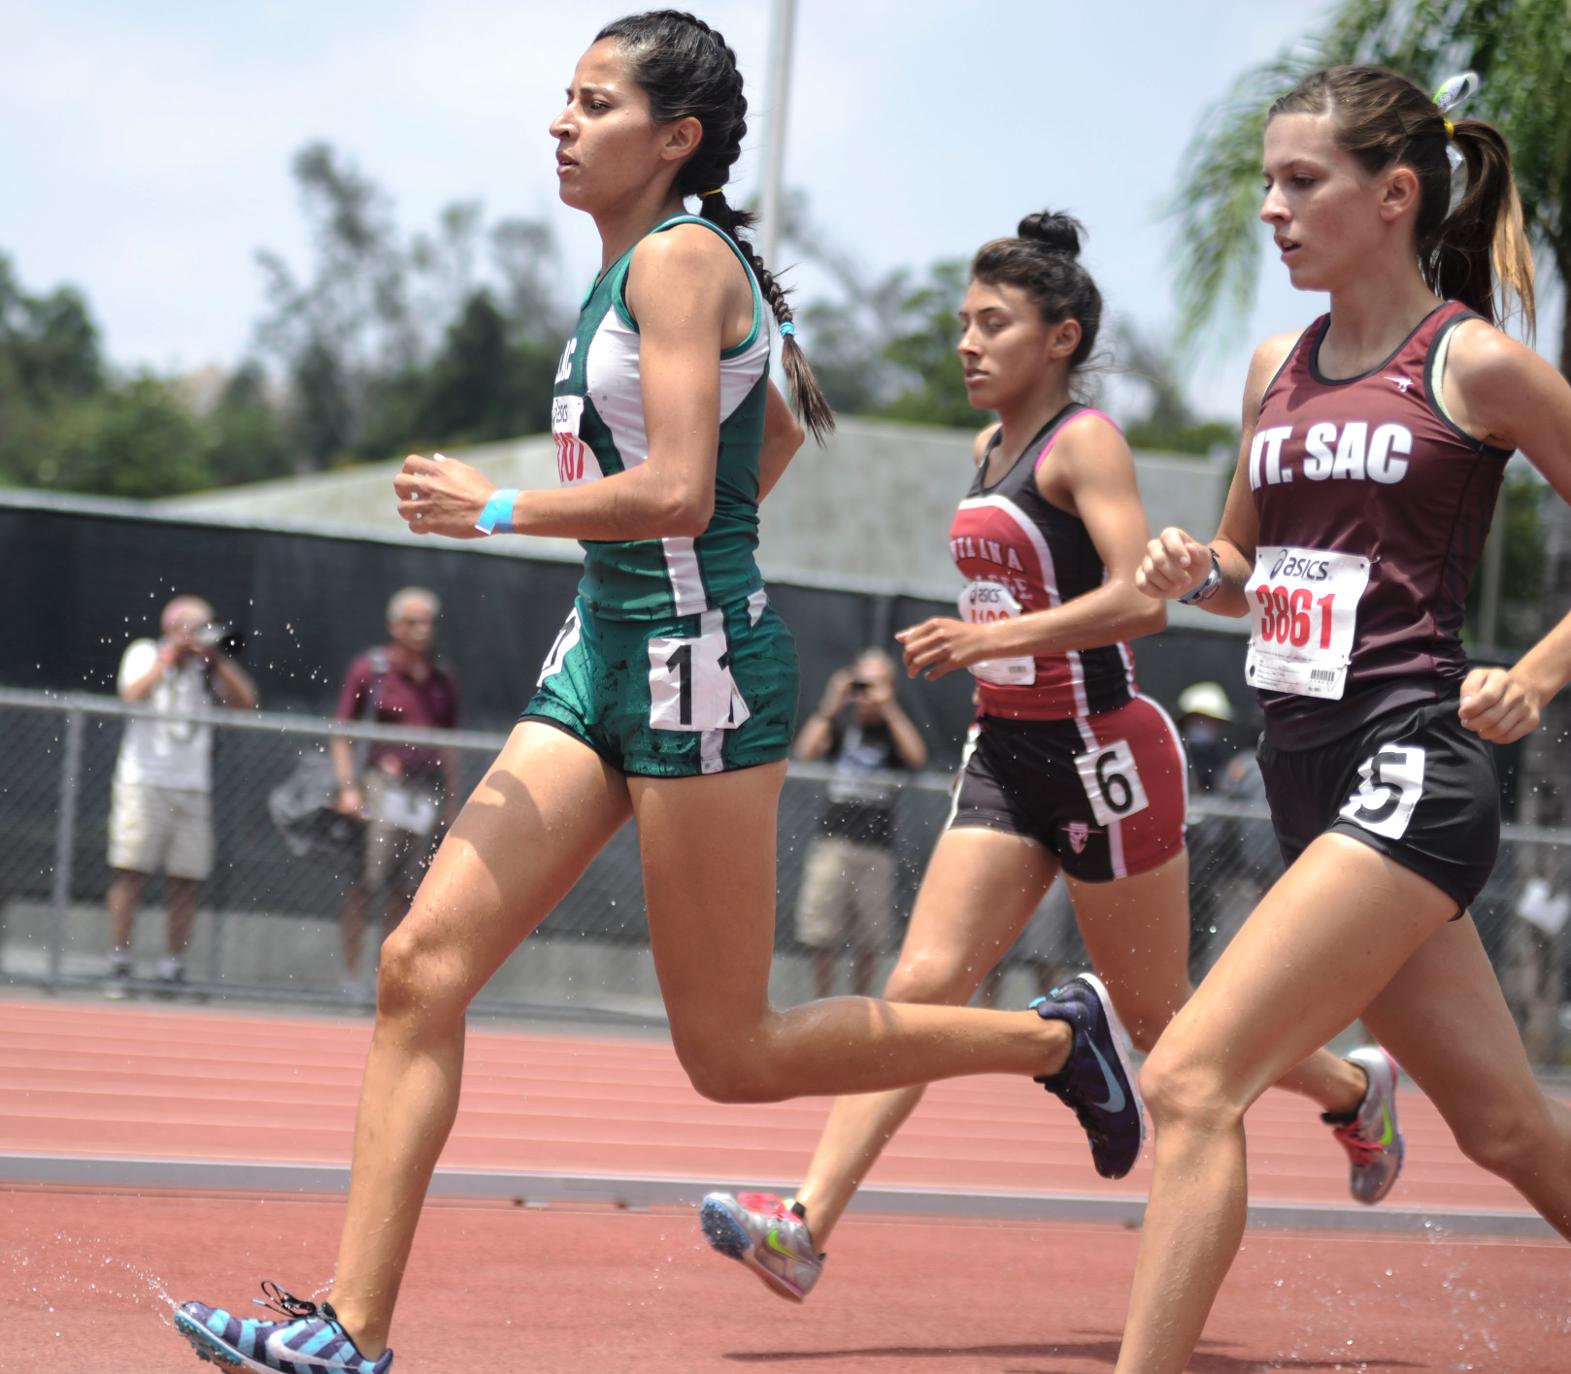 Five-time ELAC All-American Laura Aceves, who competes for Cal State San Bernardino, is pictured in the 2014 CCCAA SoCal Championships steeplechase run, which she won as a Husky.